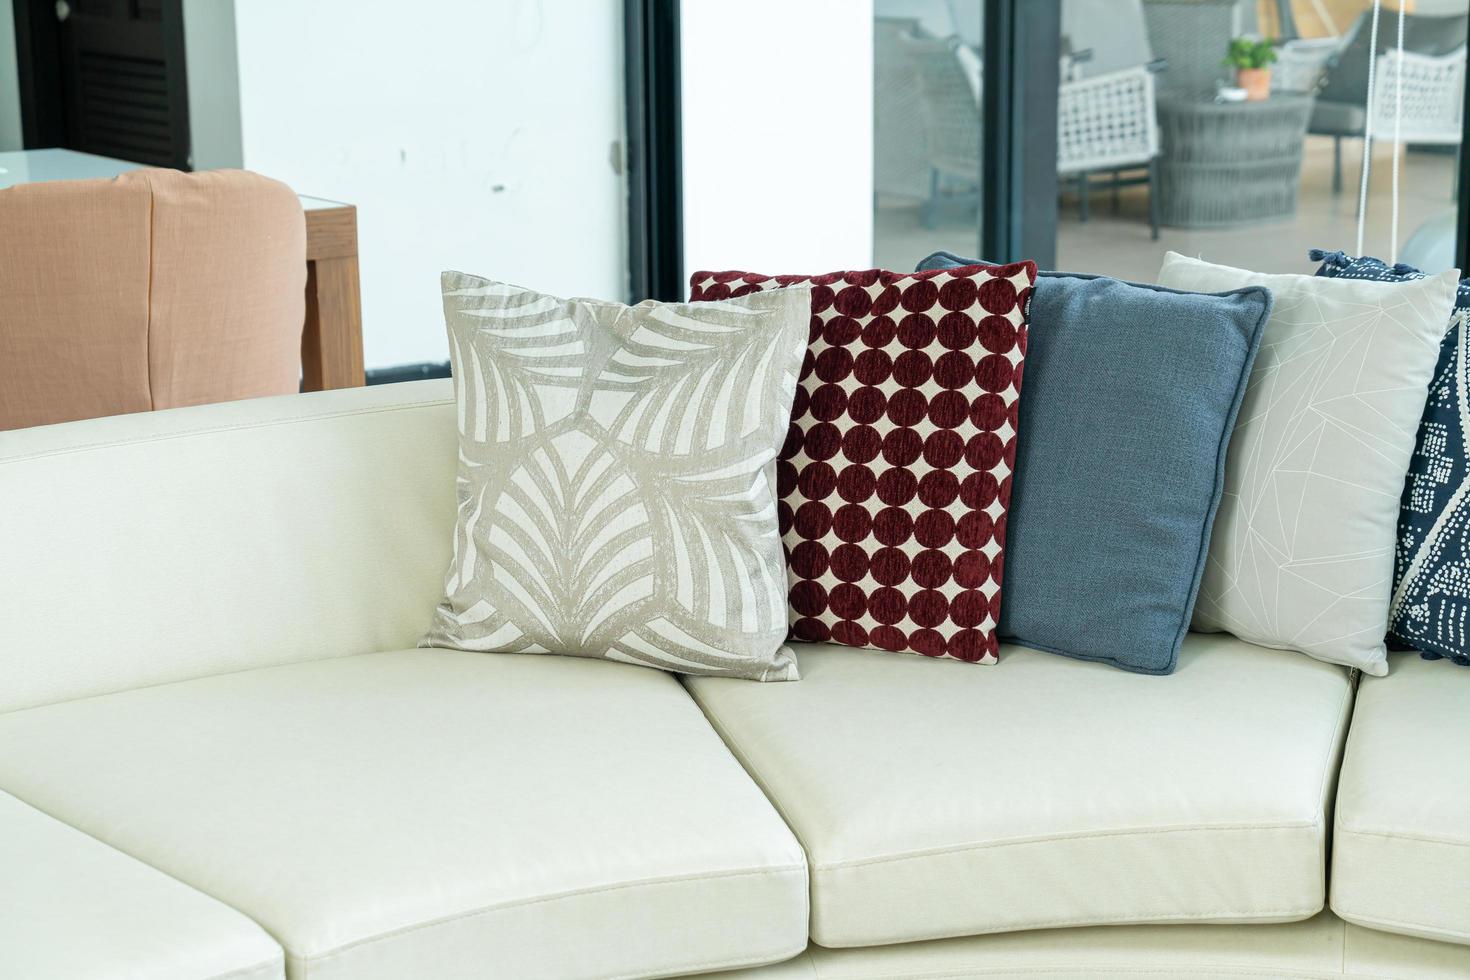 Pillows decoration on a sofa in a living room photo